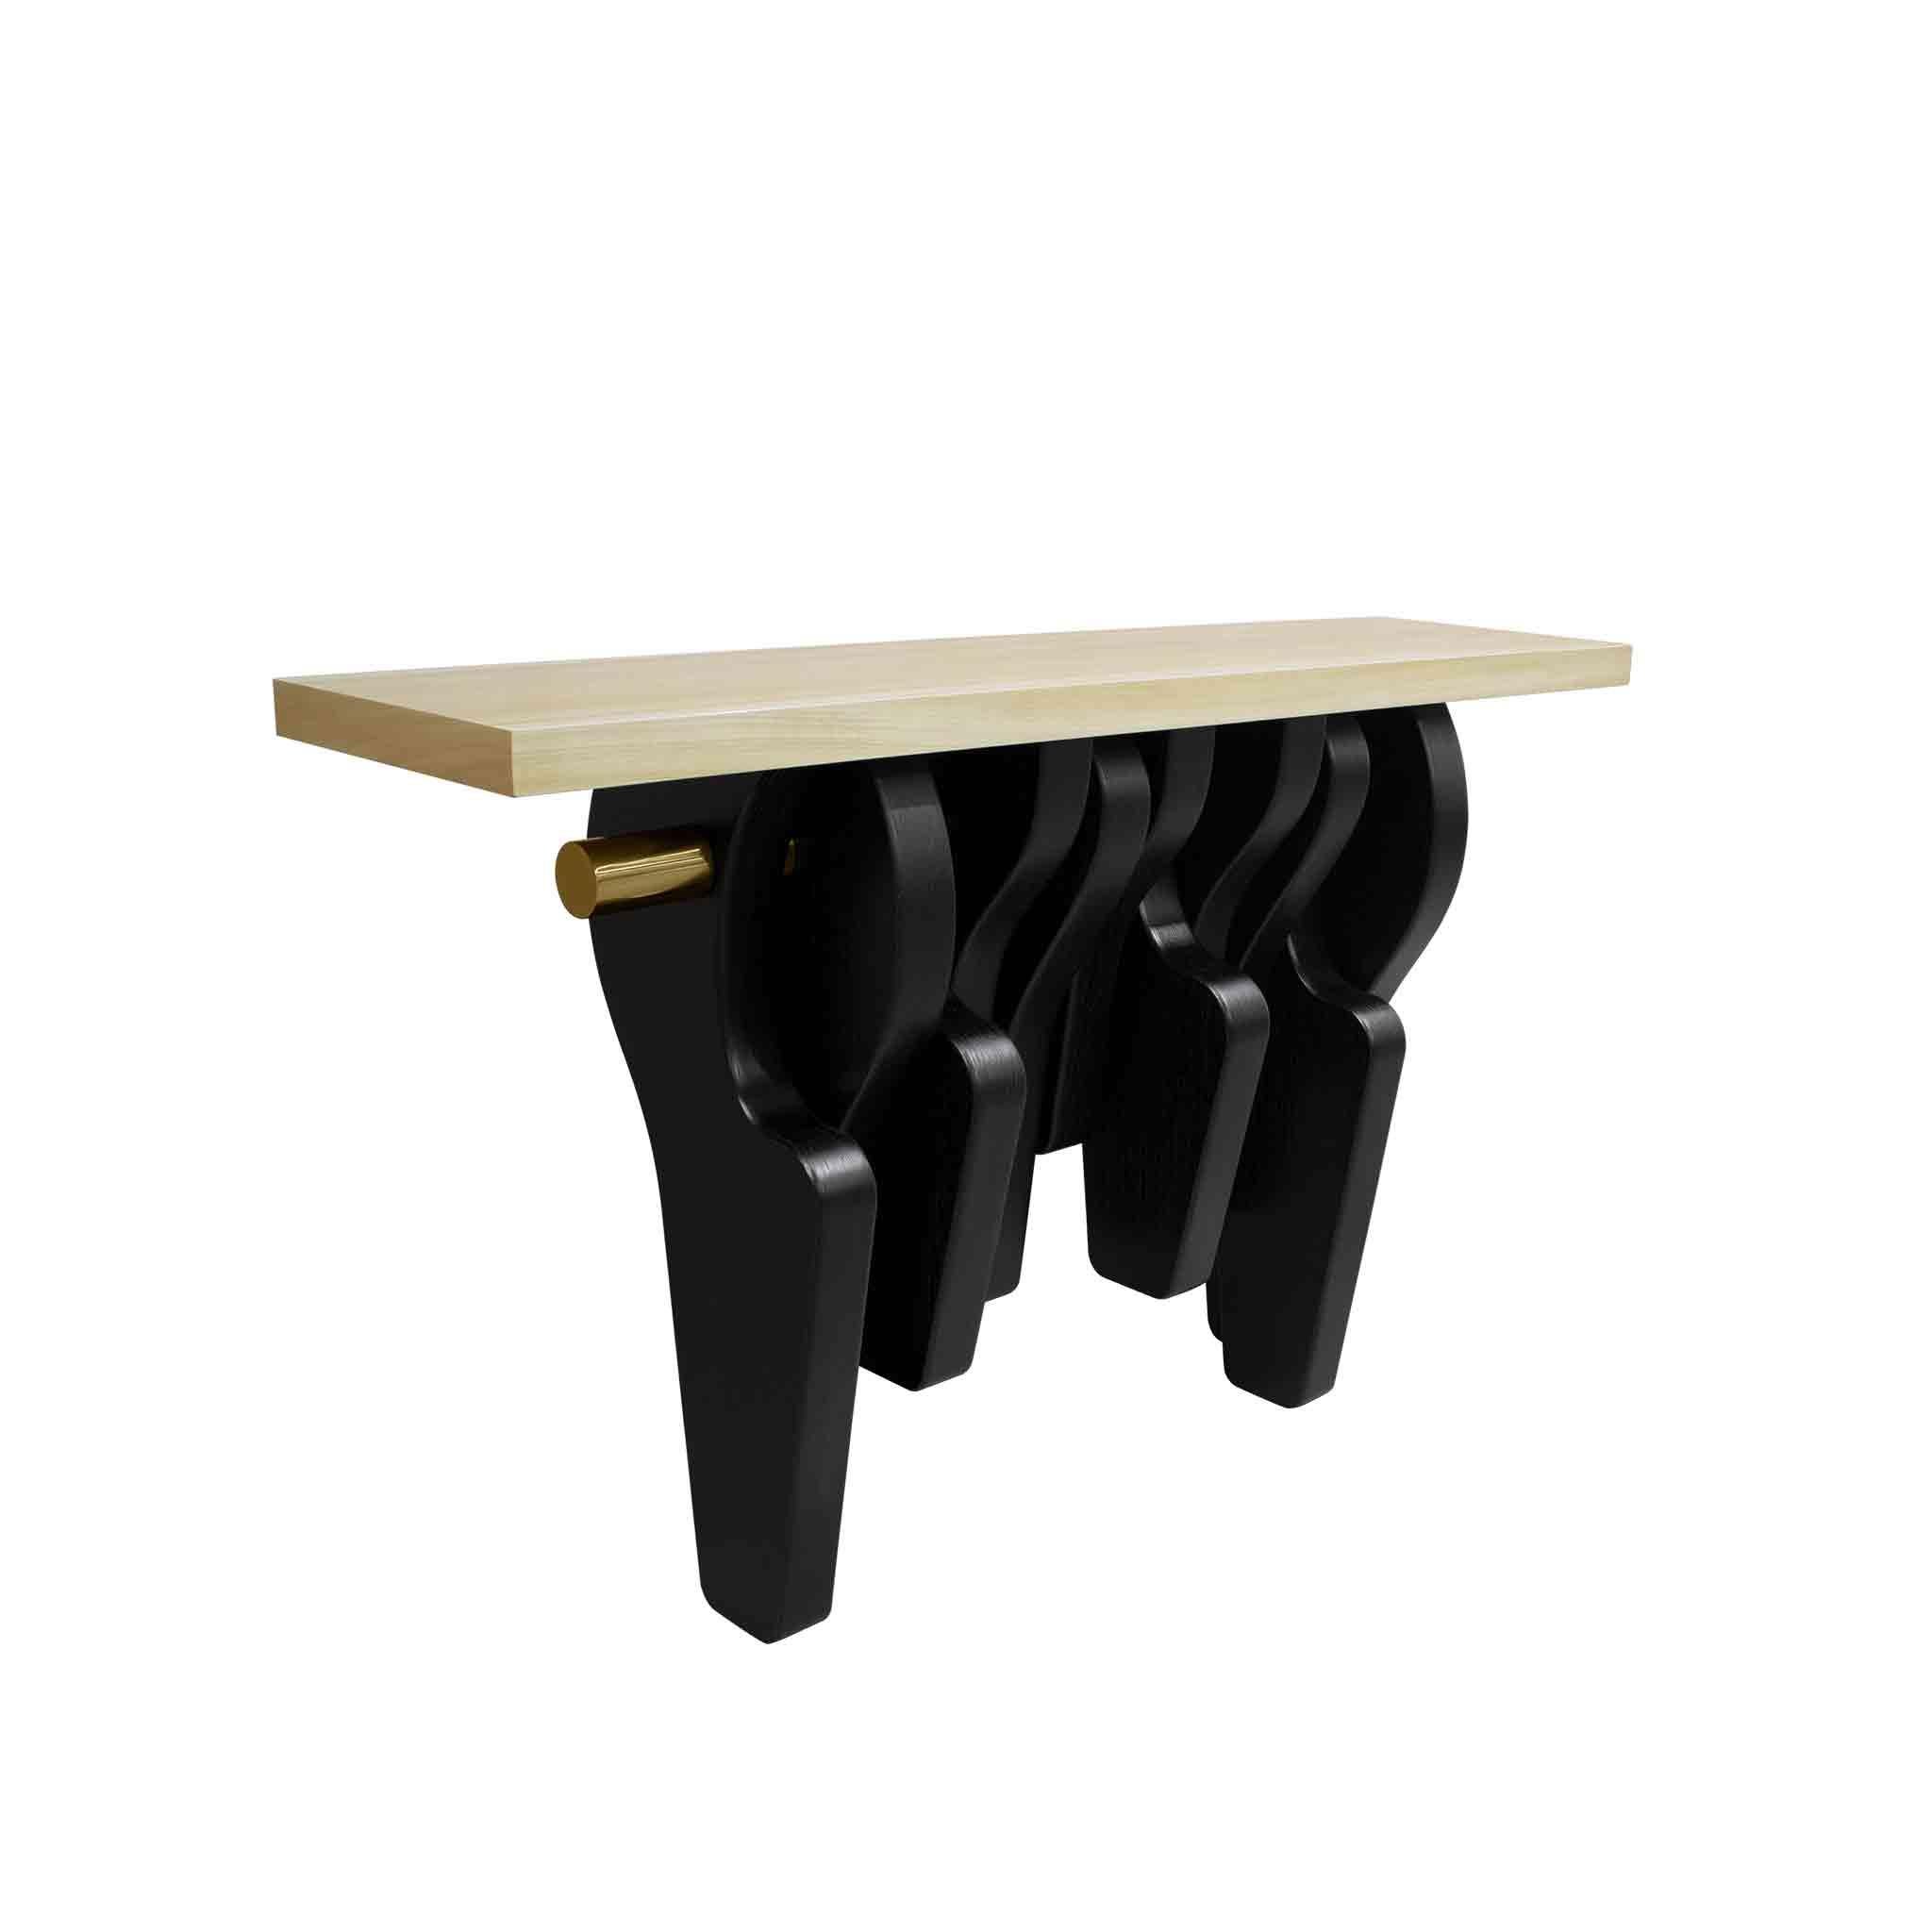 Art Deco Inspired Console Table In Birdeye Wood, Wenge Wood & Polished Brass For Sale 1